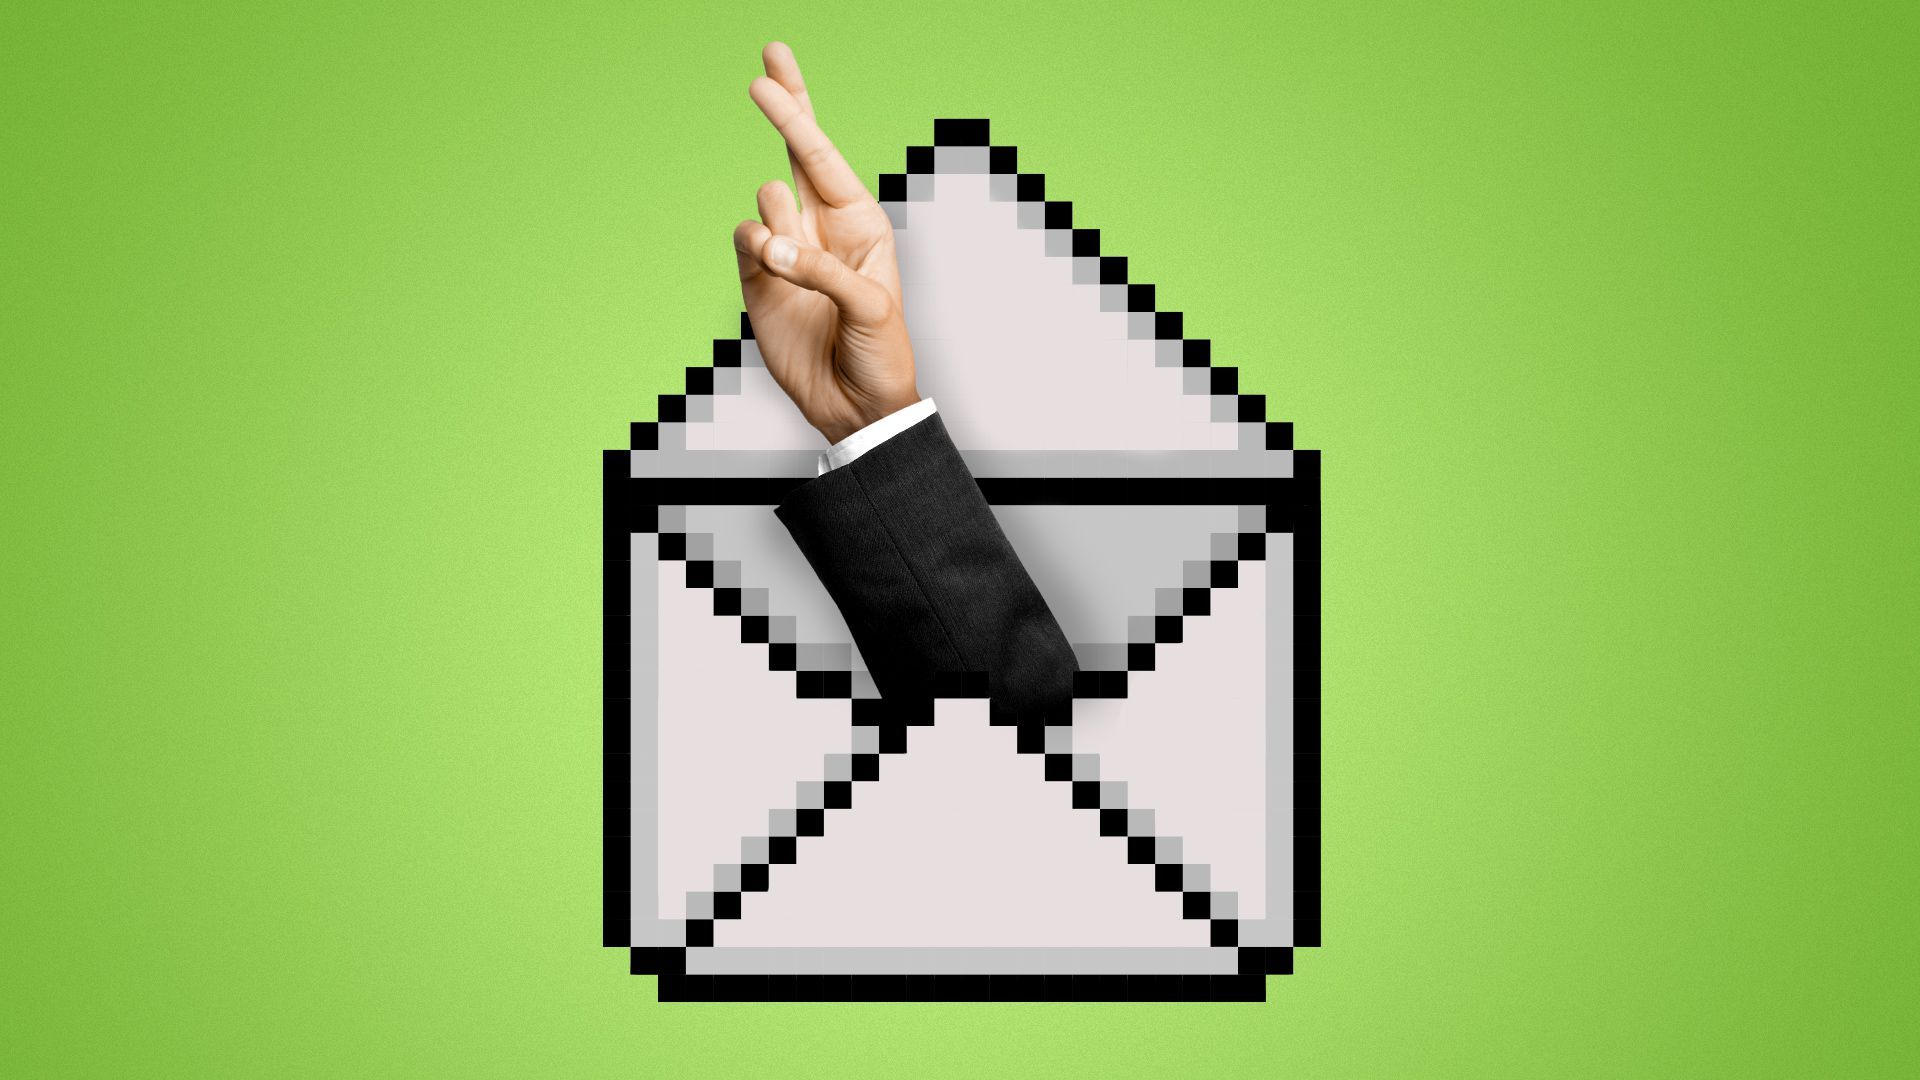 Illustration of an 8-bit envelope with a hand with crossed fingers coming out of it. 